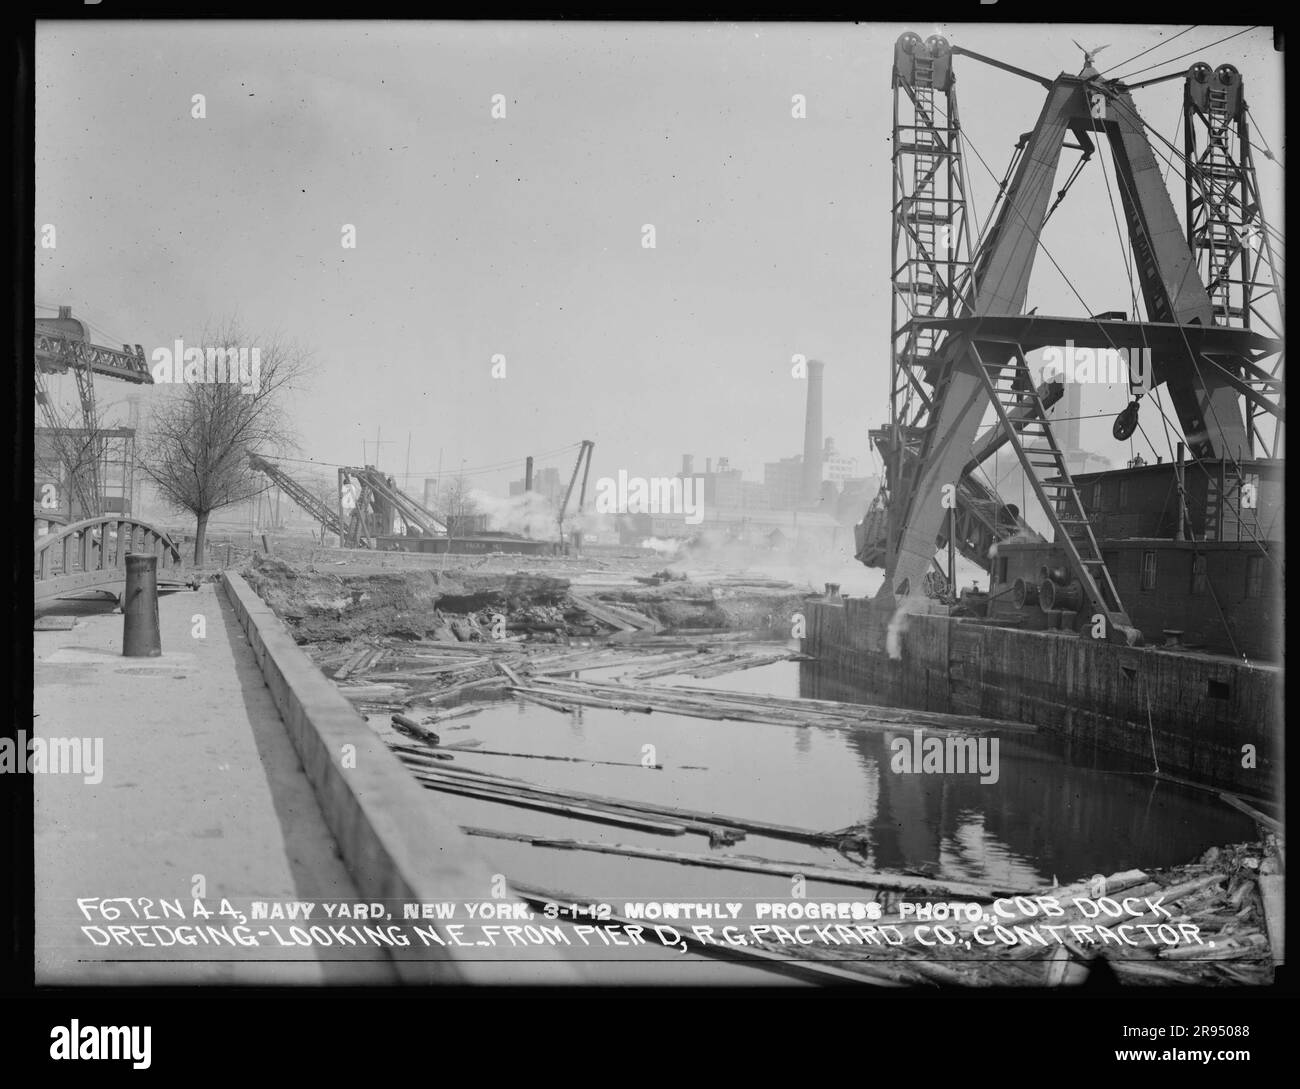 Monthly Progress Photo, Cob Dock Dredging, Looking Northeast from Pier D, R. G. Packard Company, Contractor. Glass Plate Negatives of the Construction and Repair of Buildings, Facilities, and Vessels at the New York Navy Yard. Stock Photo